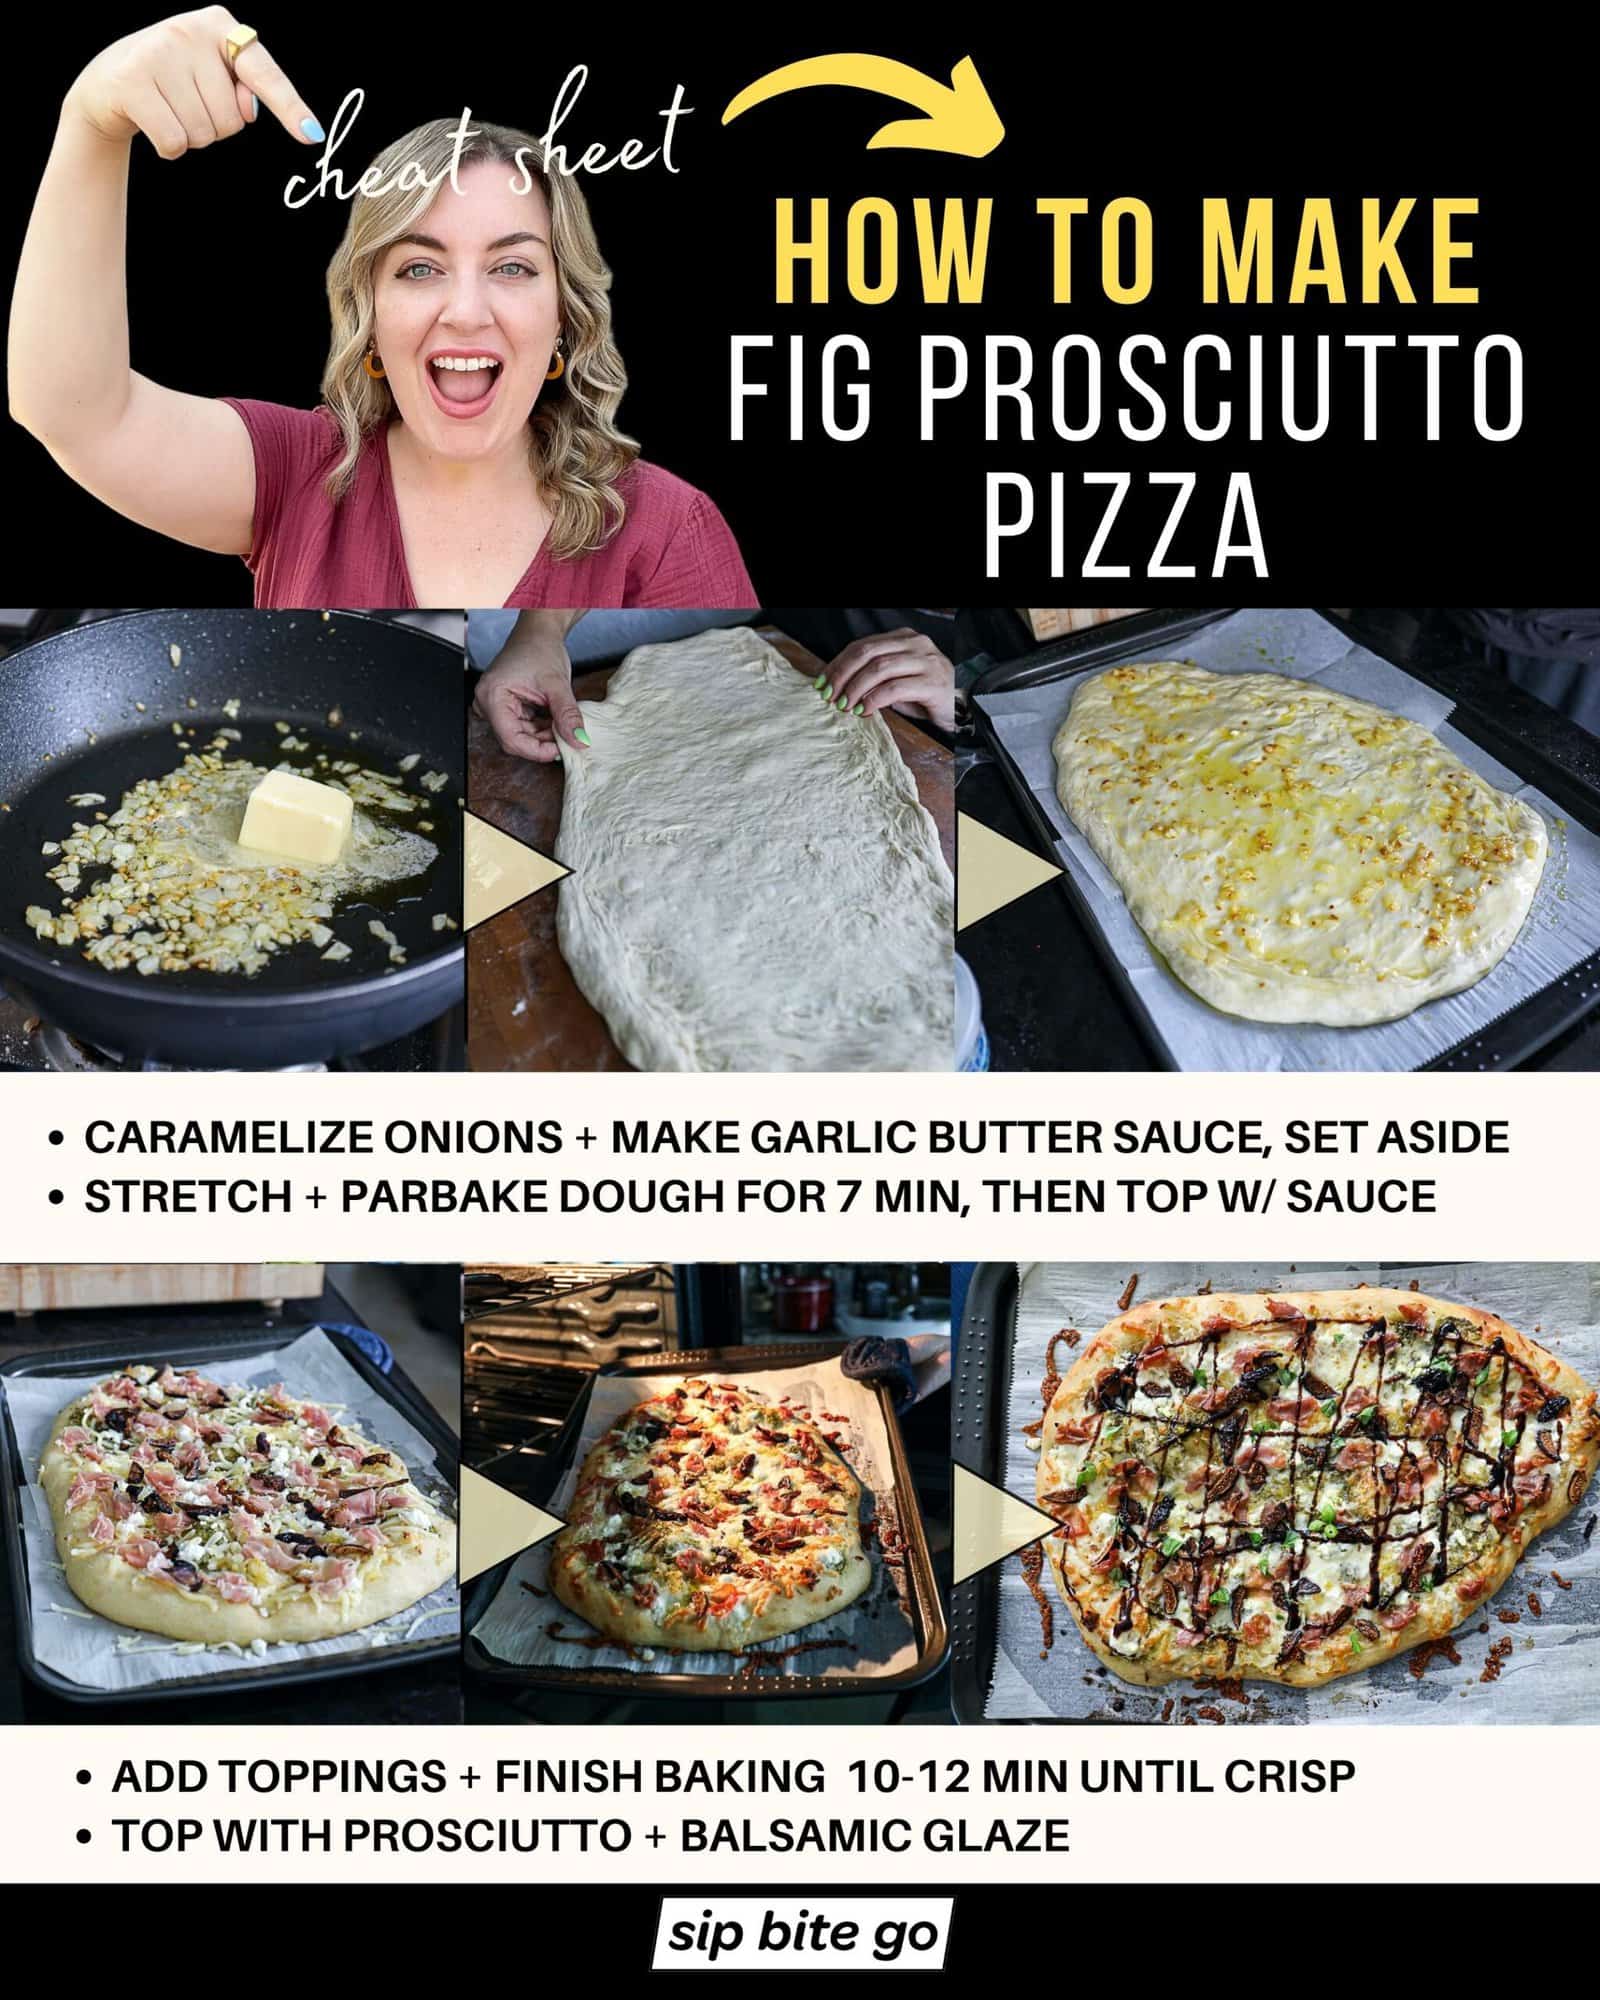 Infographic demonstrating recipe steps for baking fig and prosciutto pizza in the oven on a baking sheet or pizza stone with captions and Jenna Passaro from Sip Bite Go